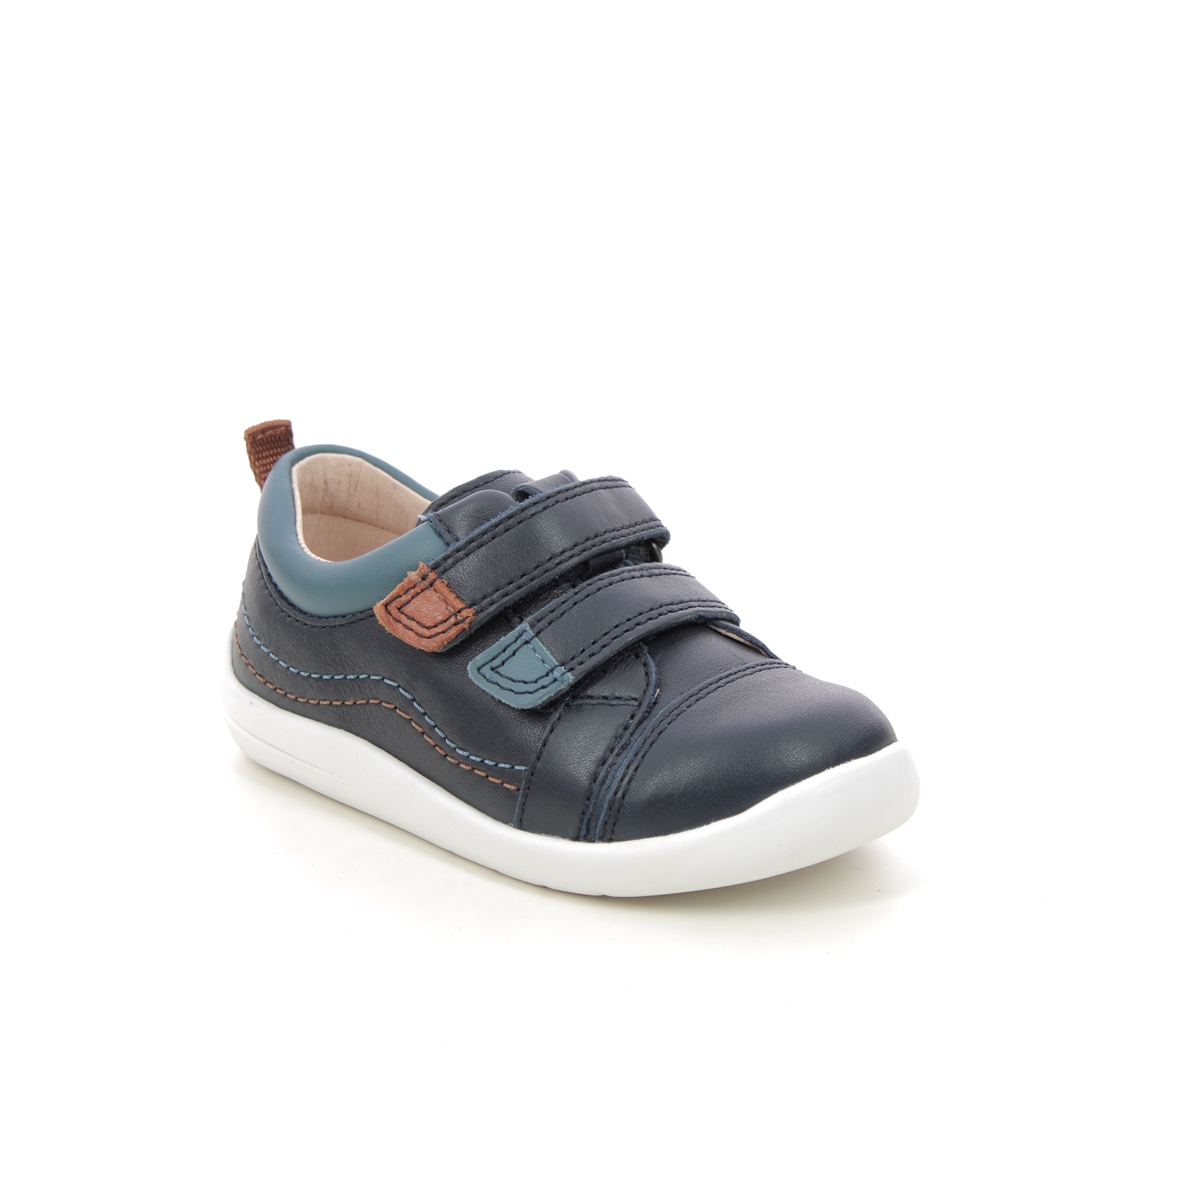 Start Rite - Clubhouse Jojo In Navy Leather 0800-96F In Size 6.5 In Plain Navy Leather Boys First And Toddler Shoes  In Navy Leather For kids